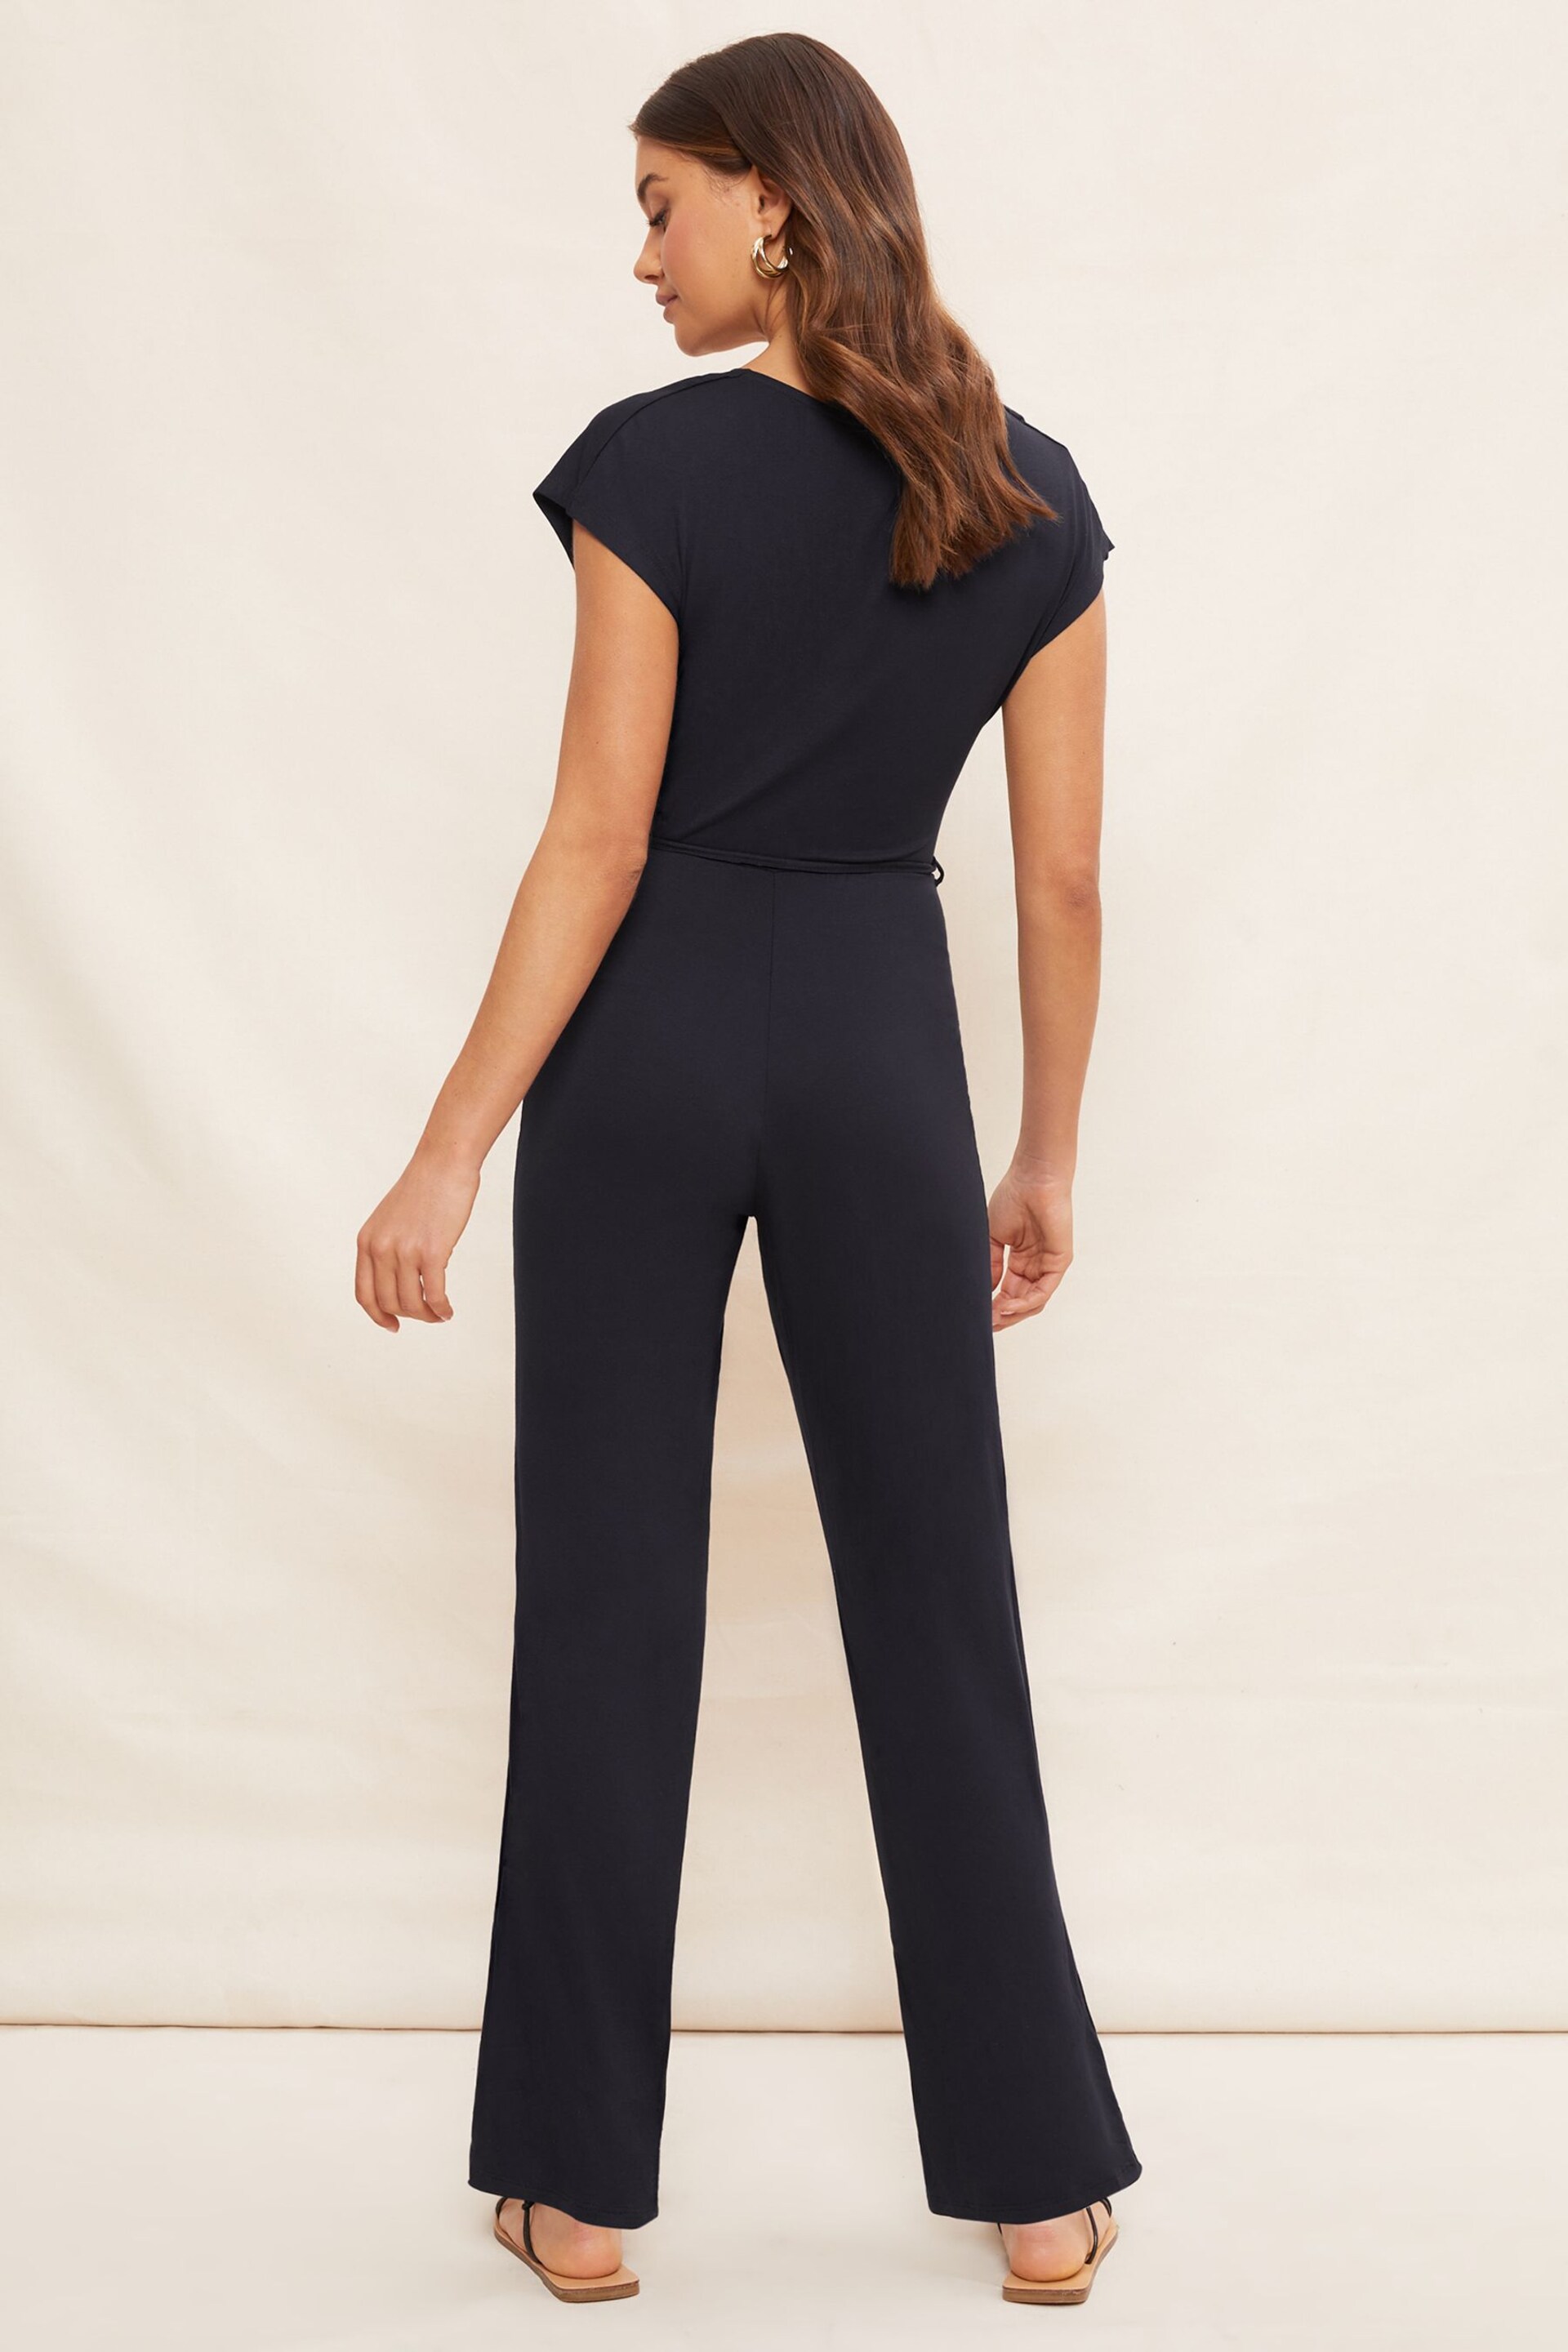 Friends Like These Navy Jersey Wide Leg Wrap Style V Neck Summer Jumpsuit - Image 4 of 4